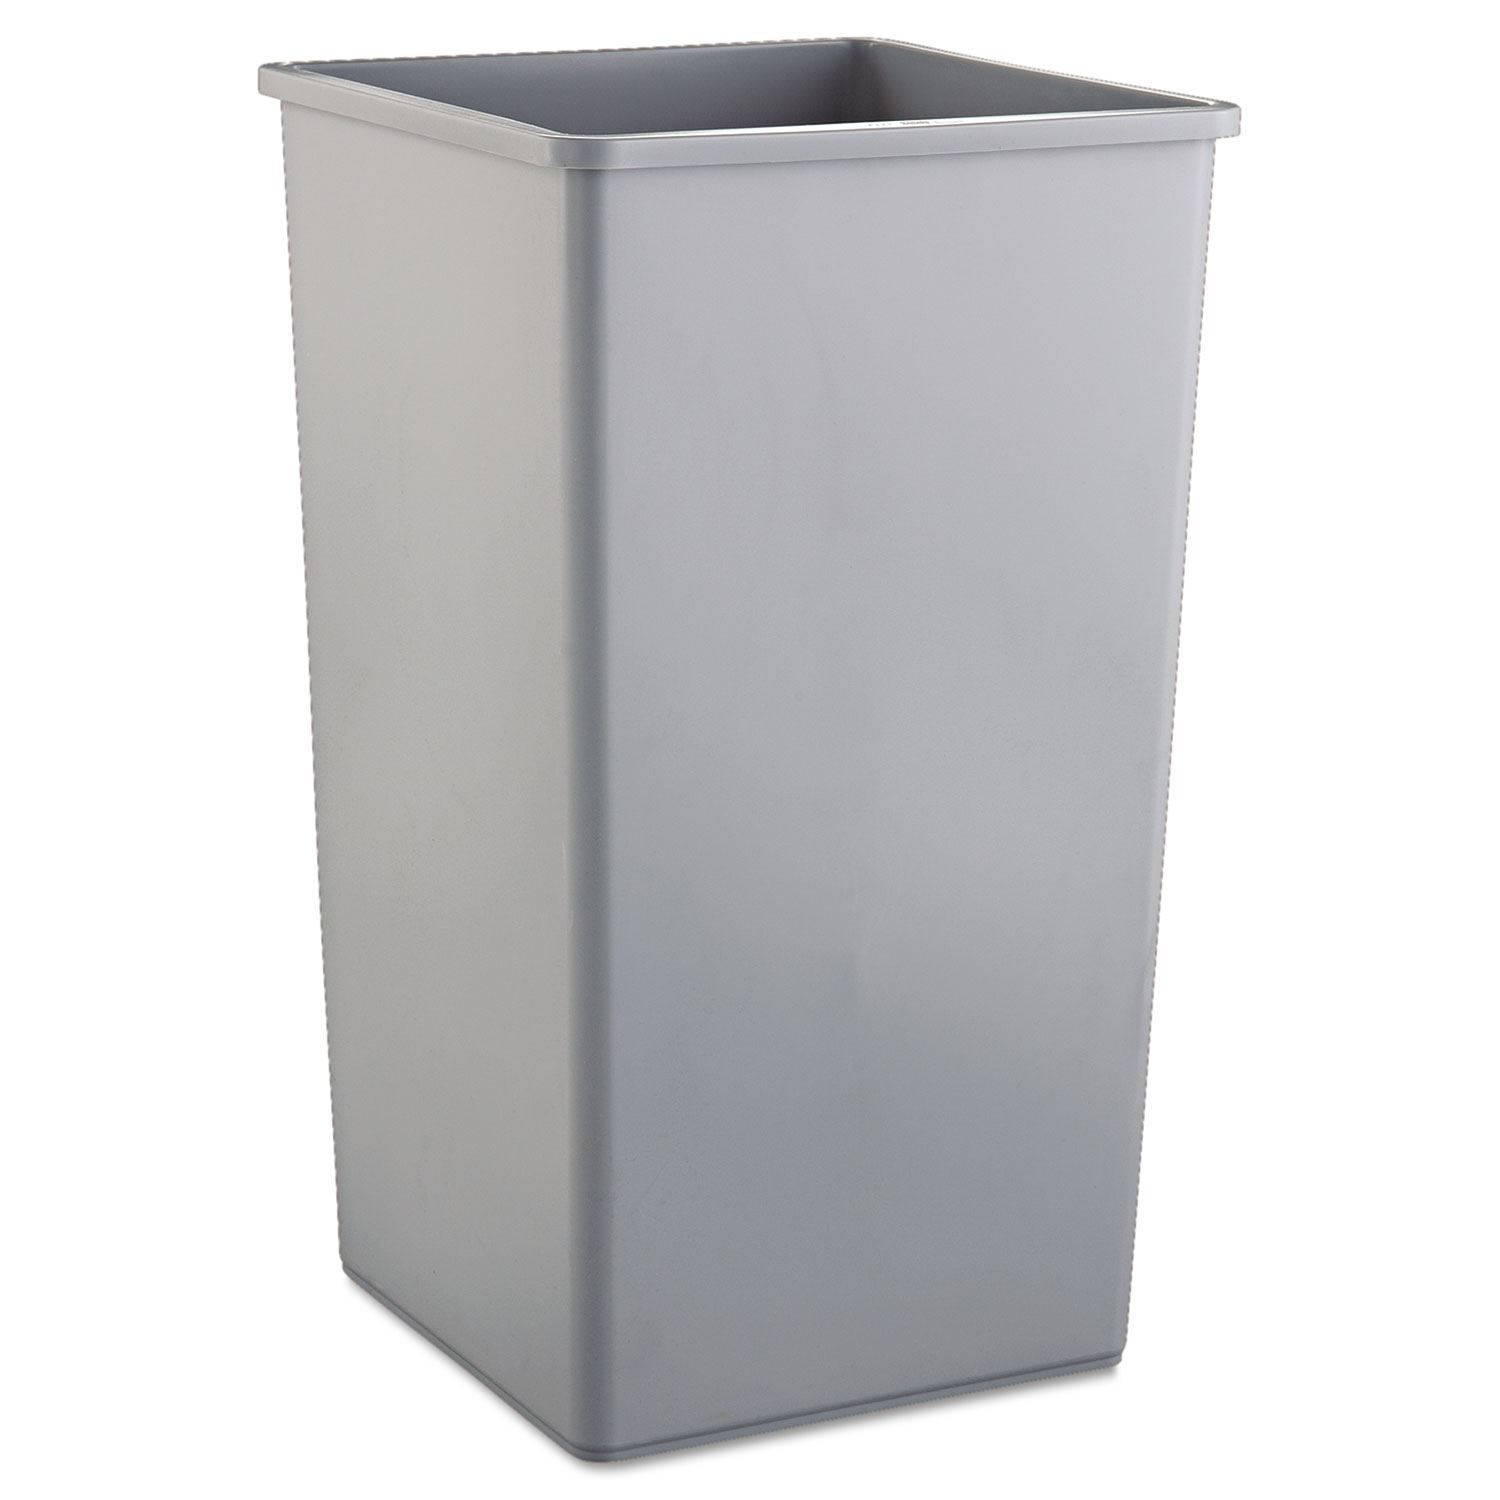  Rubbermaid Commercial 395900GRAY Untouchable Square Waste Receptacle, Plastic, 50 gal, Gray (RCP3959GRA) 